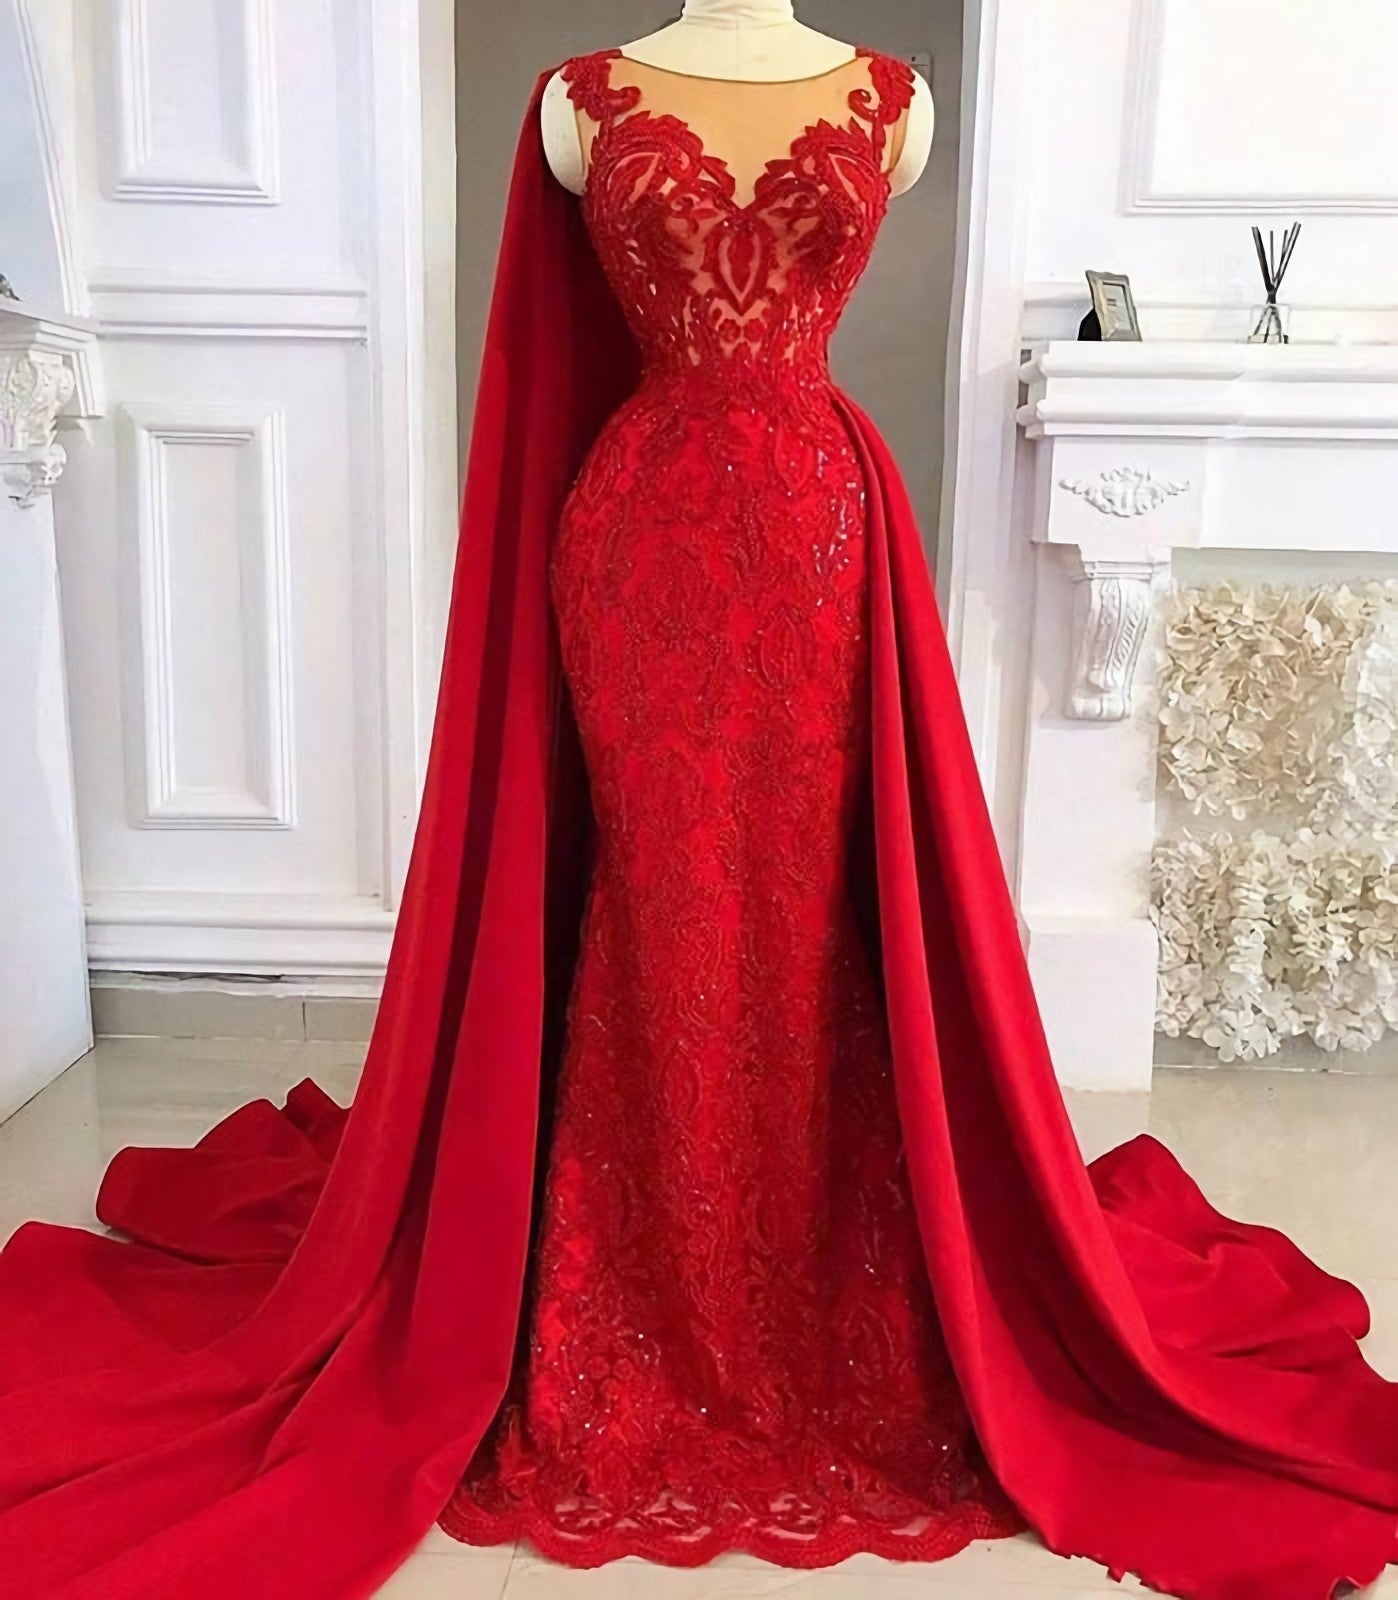 Tulle Red With Appliques Satin Sheath Long Corset Prom Dresses outfit, Prom Dress 07